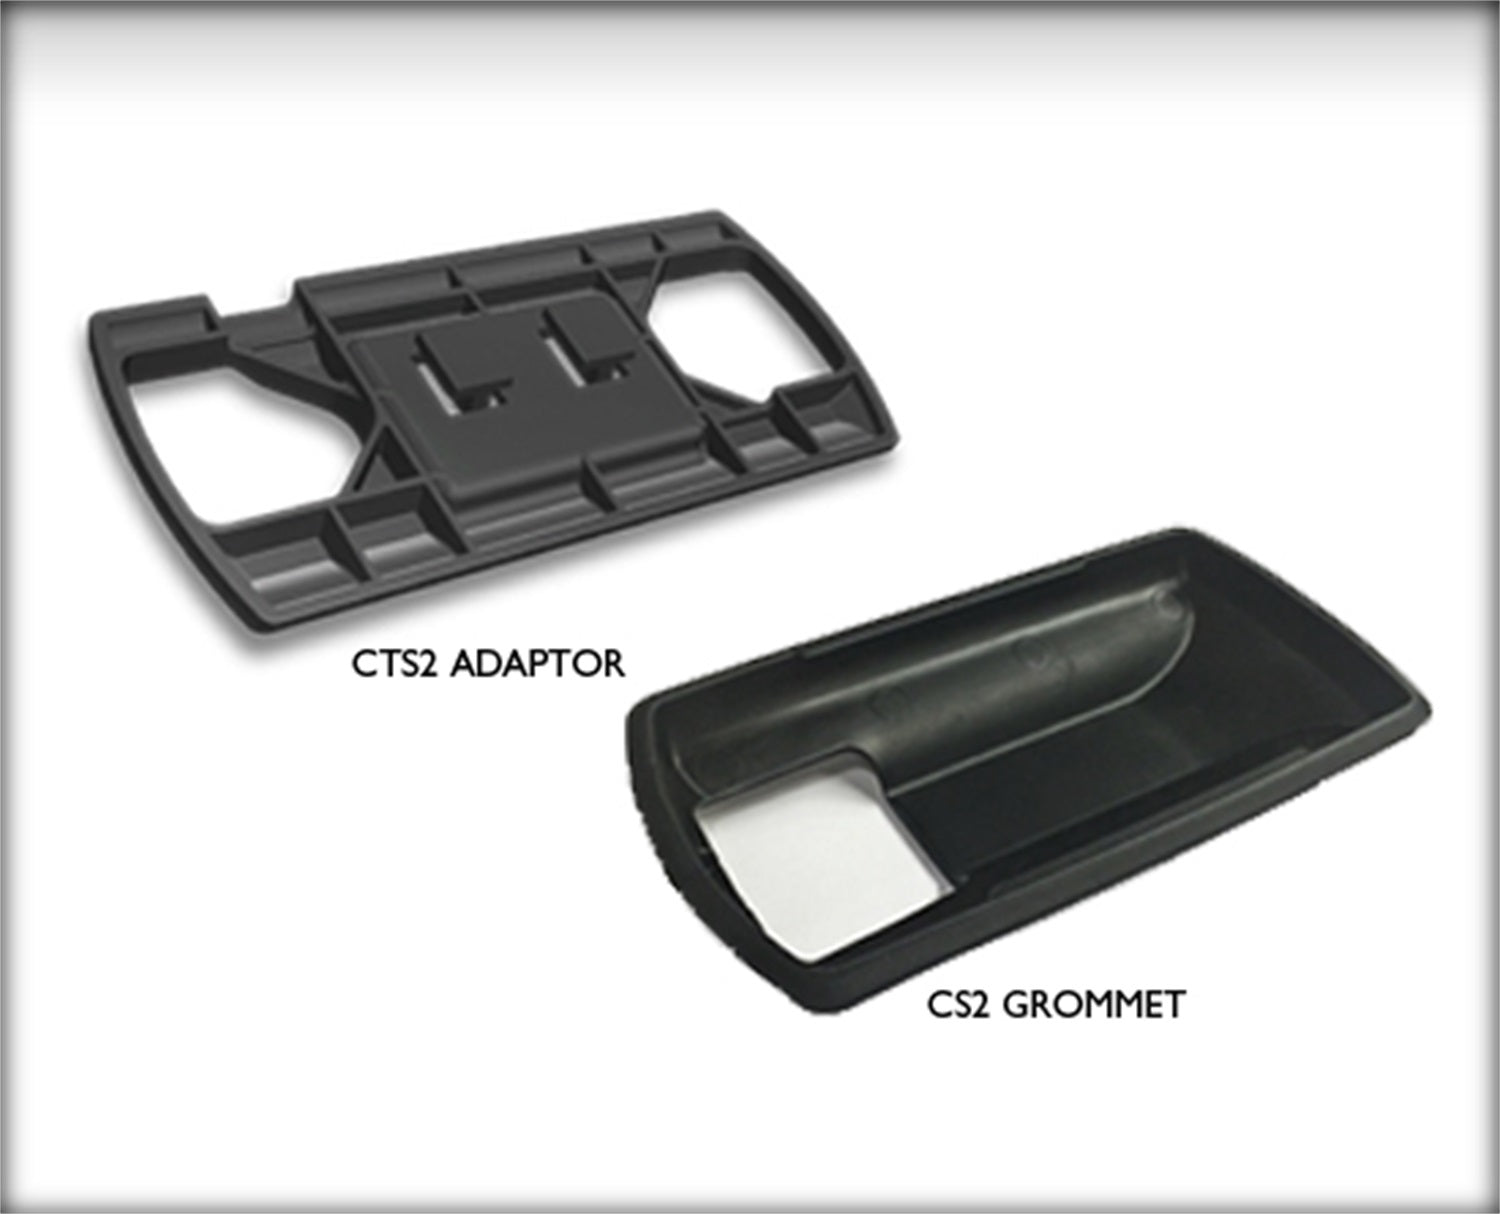 Cts2 pod adapter kit with cs2 grommet allows cts2 to be mounted in dash pods